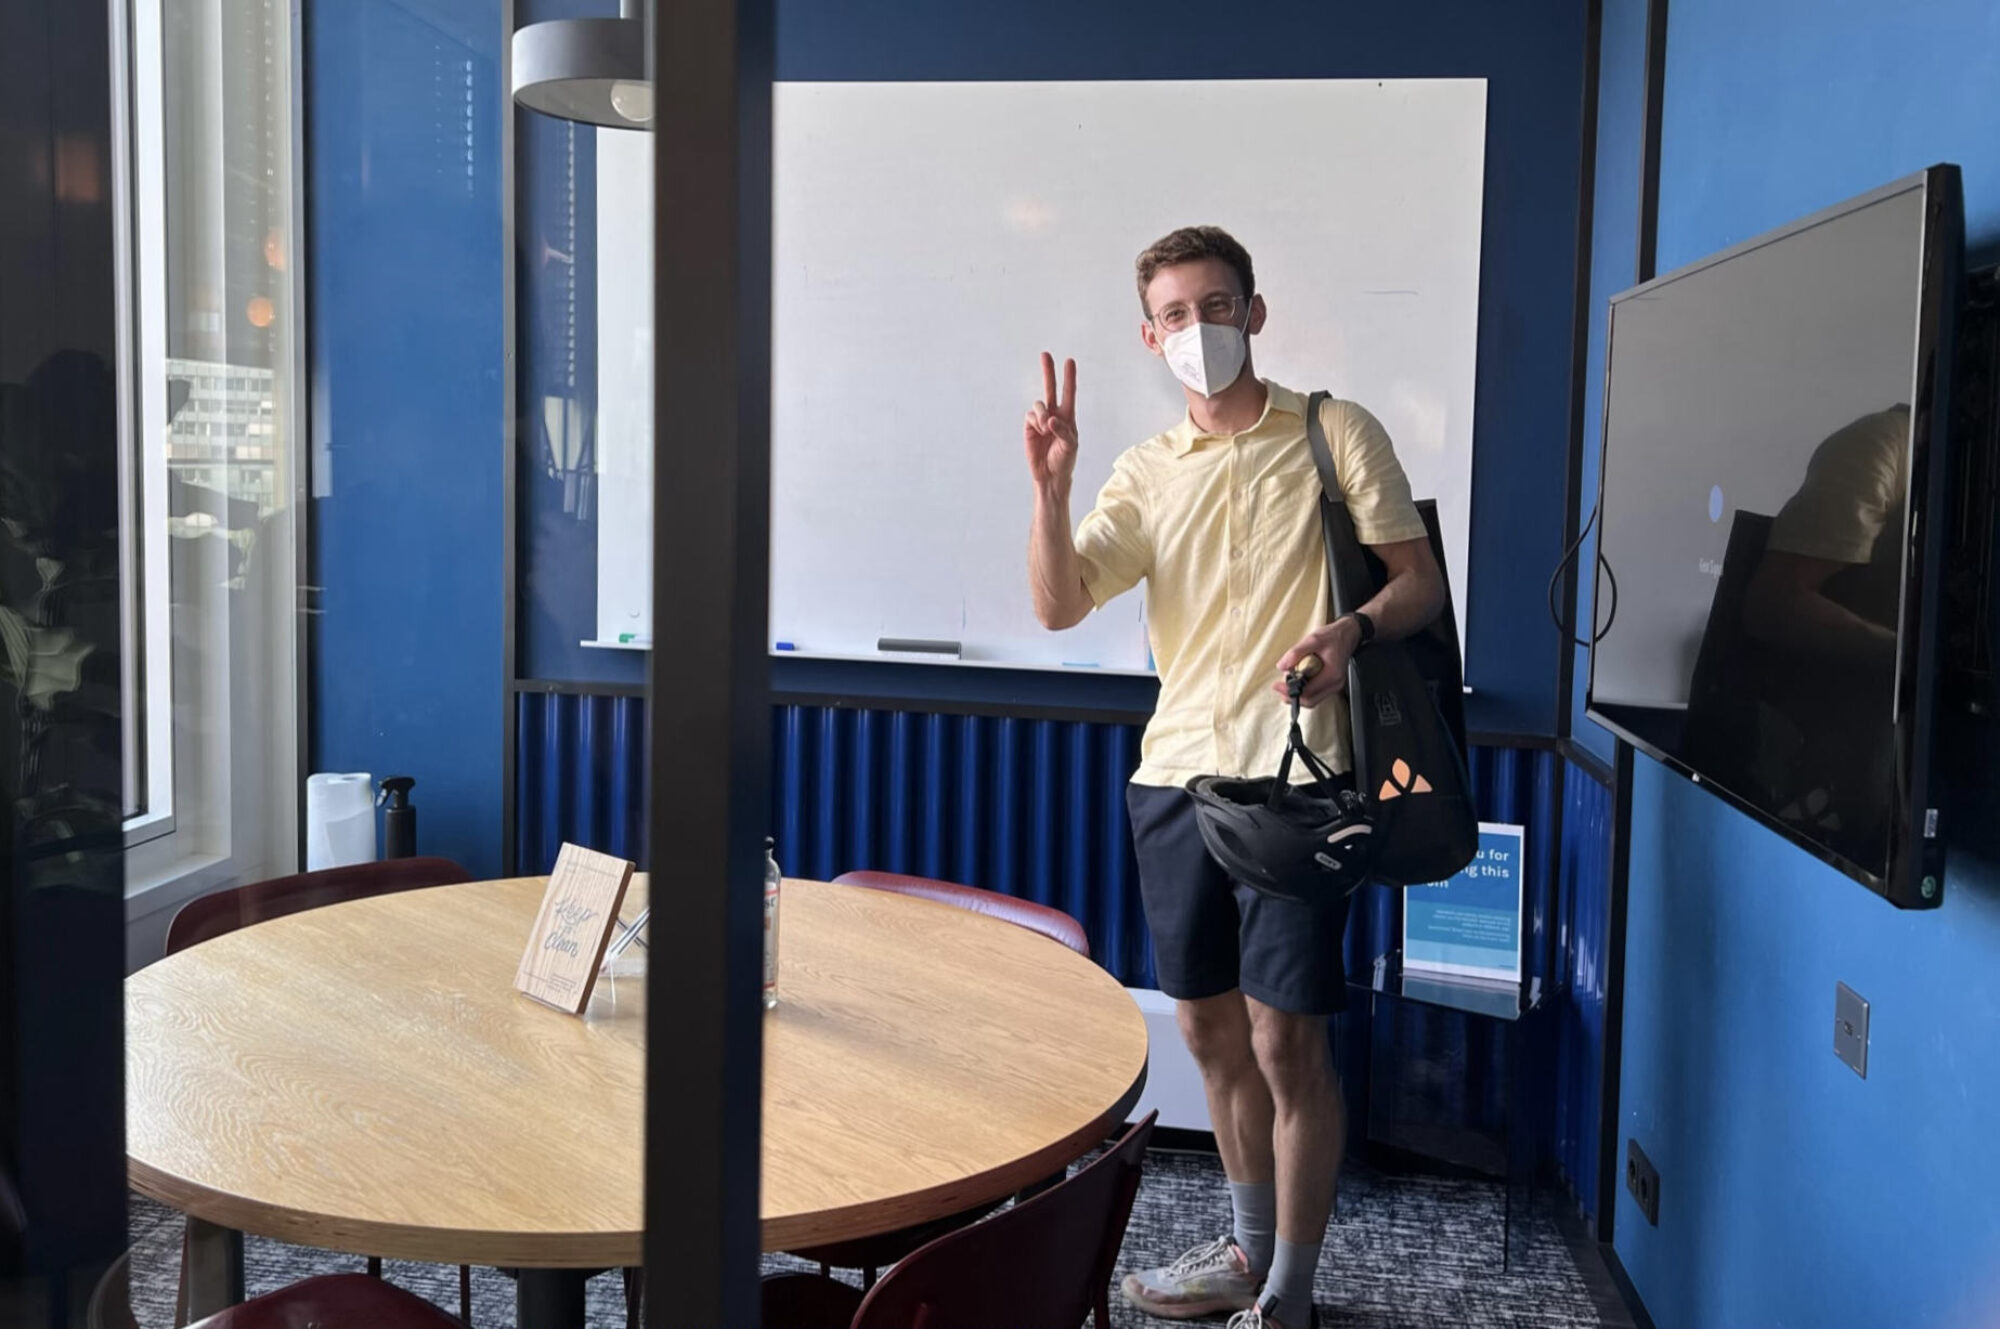 Christoph in a meeting room at wework